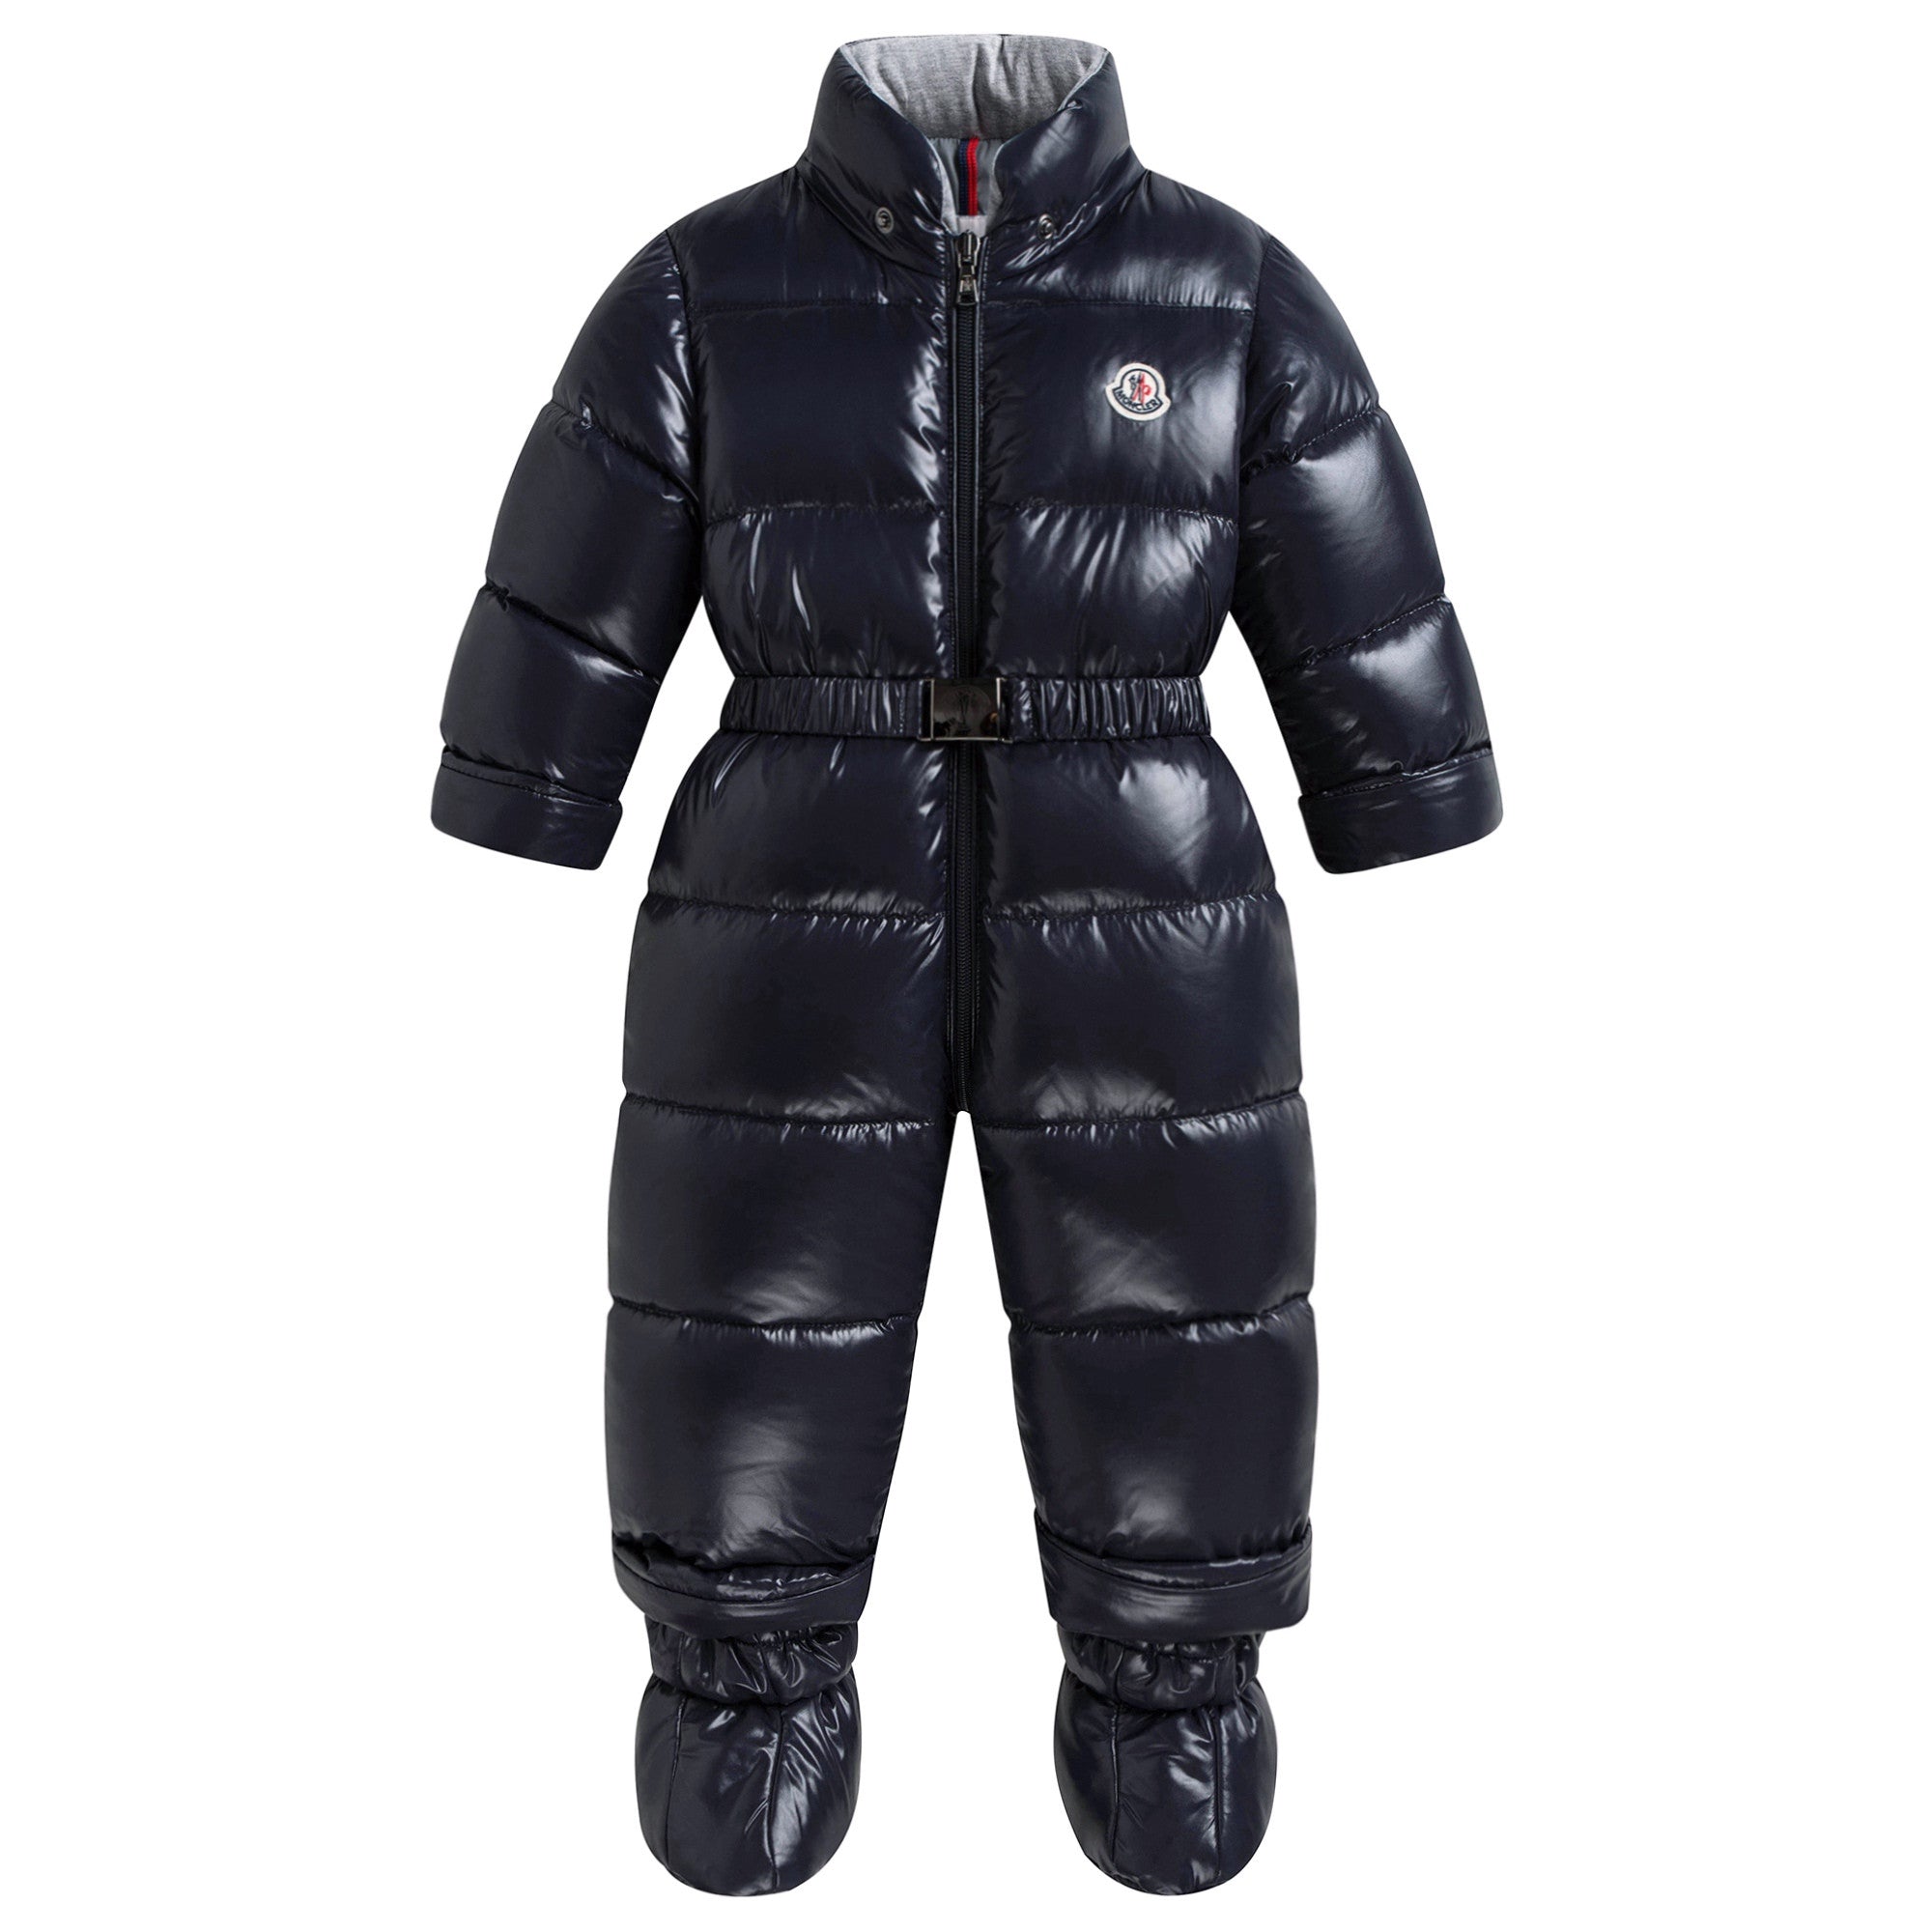 Baby Navy Blue "New Crystal" Snowsuit